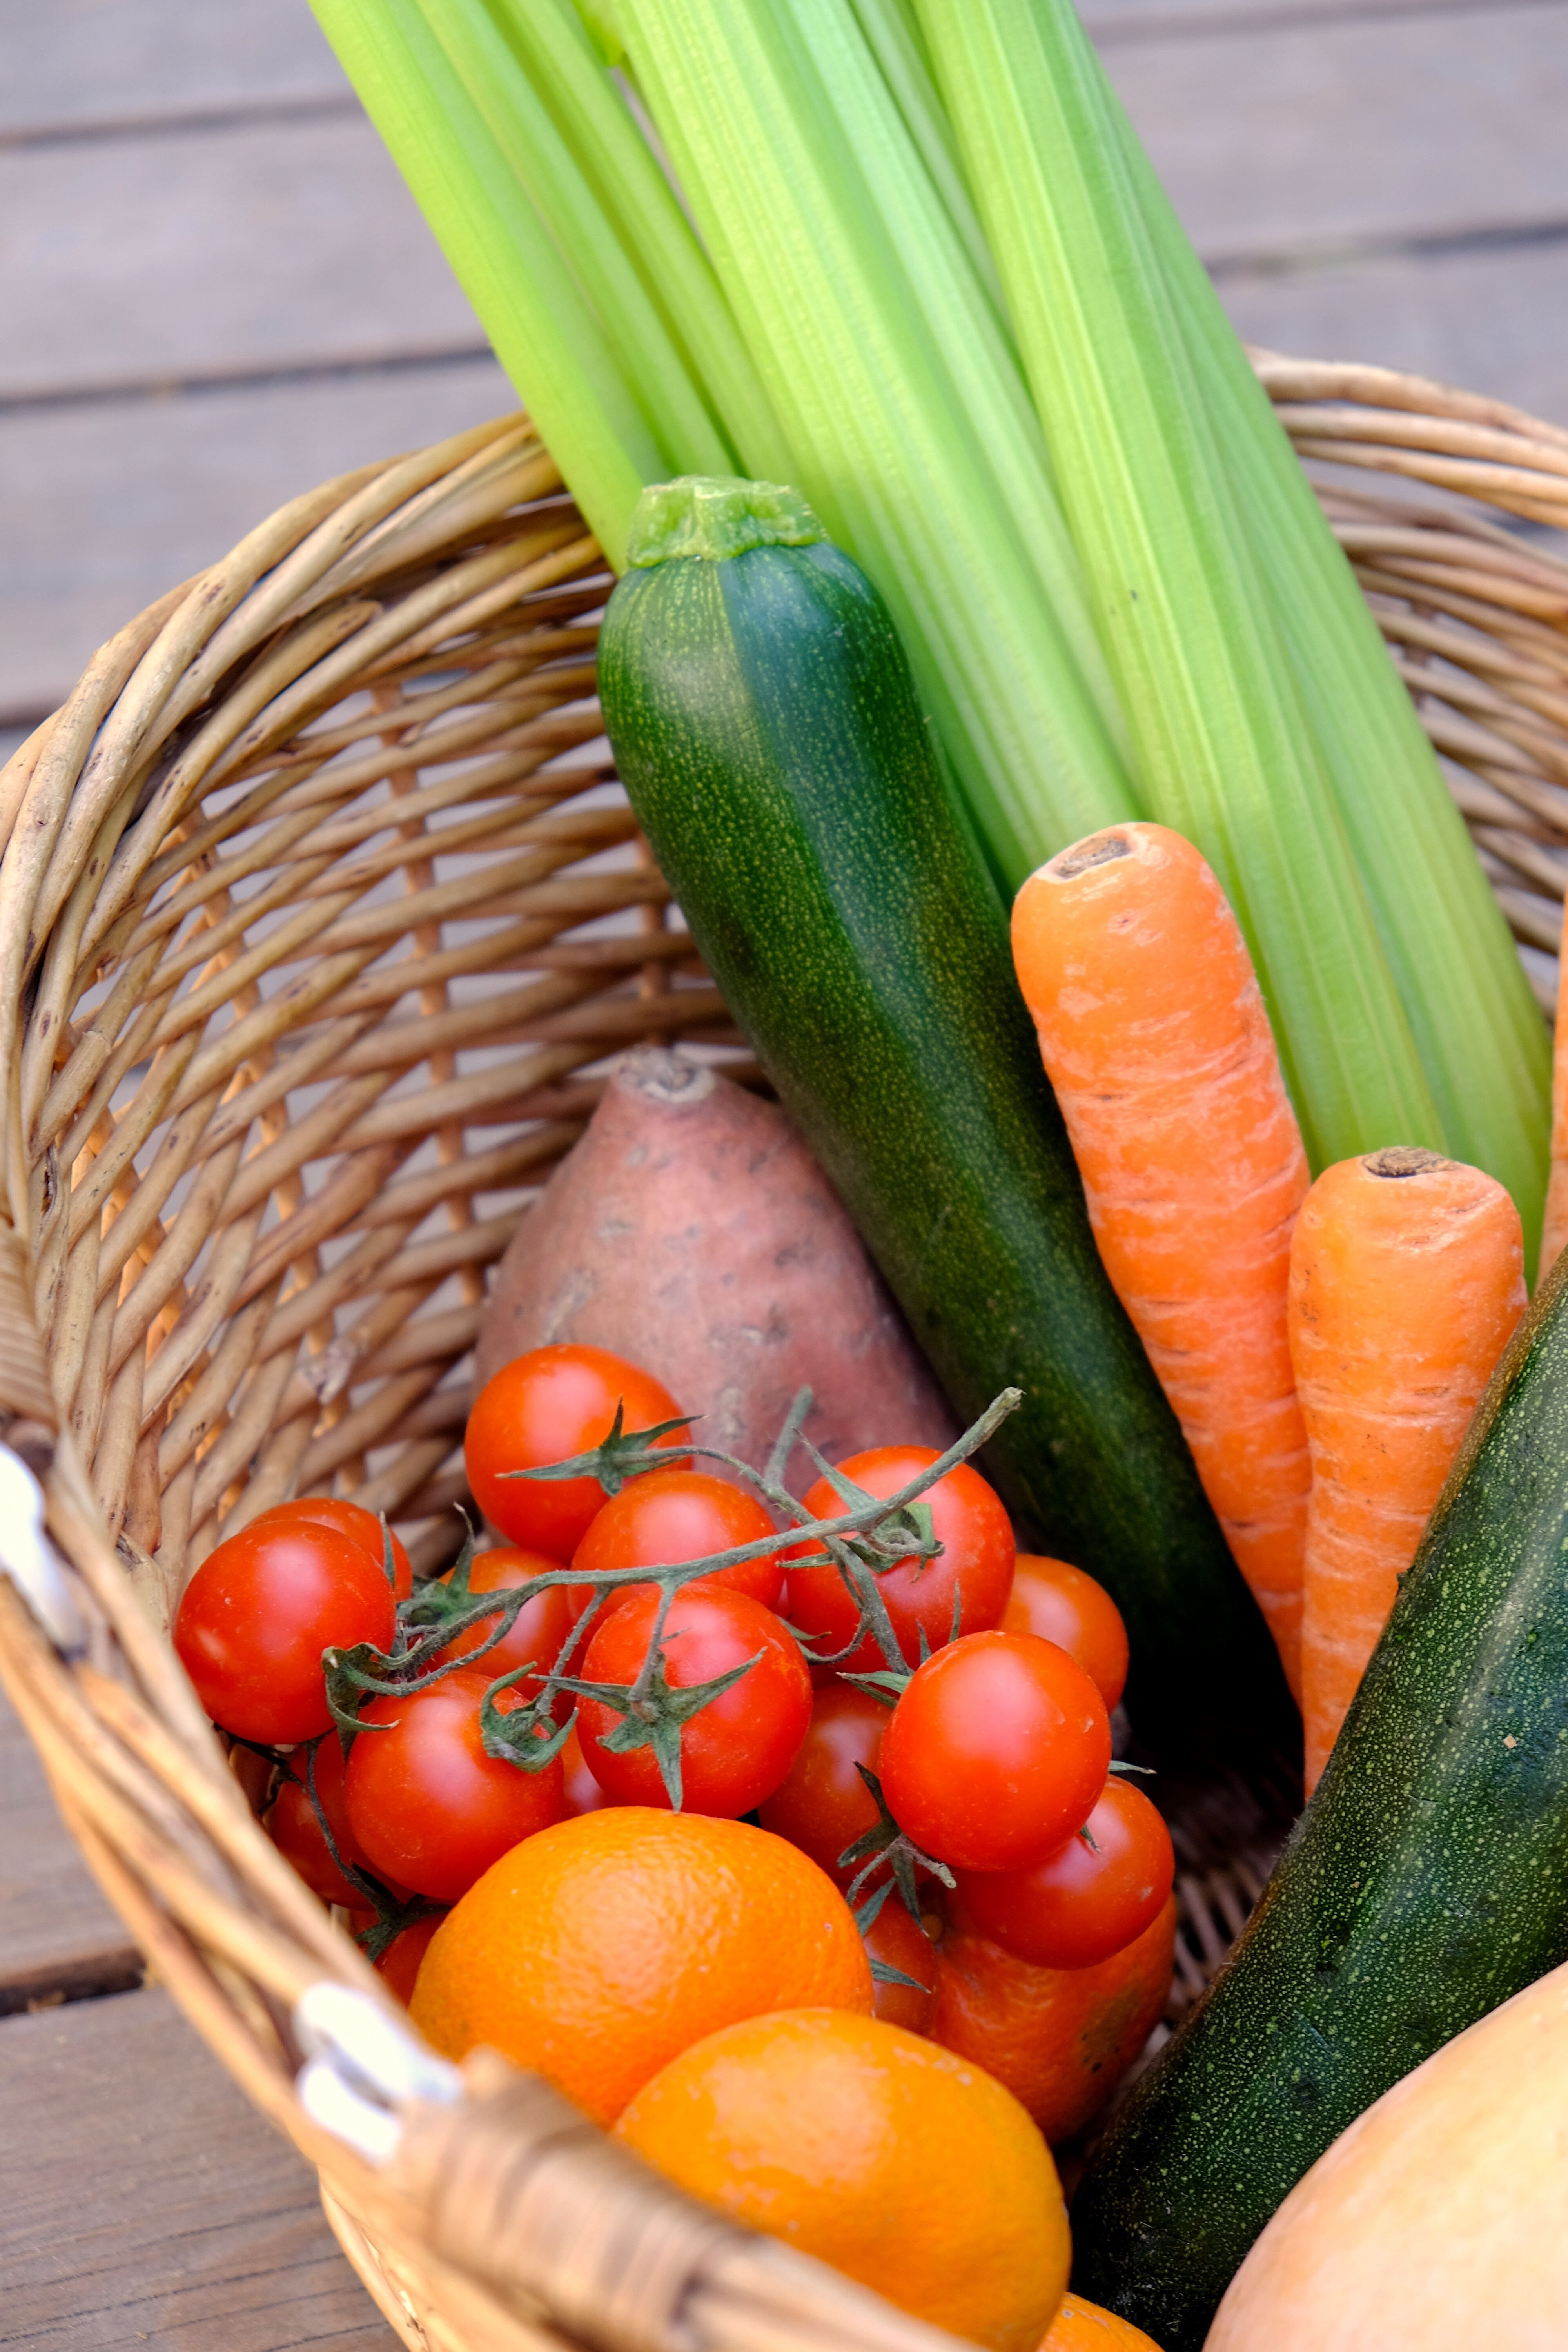 A wicker basket holds tomatoes, carrots, celery, zucchini, and a sweet potato.